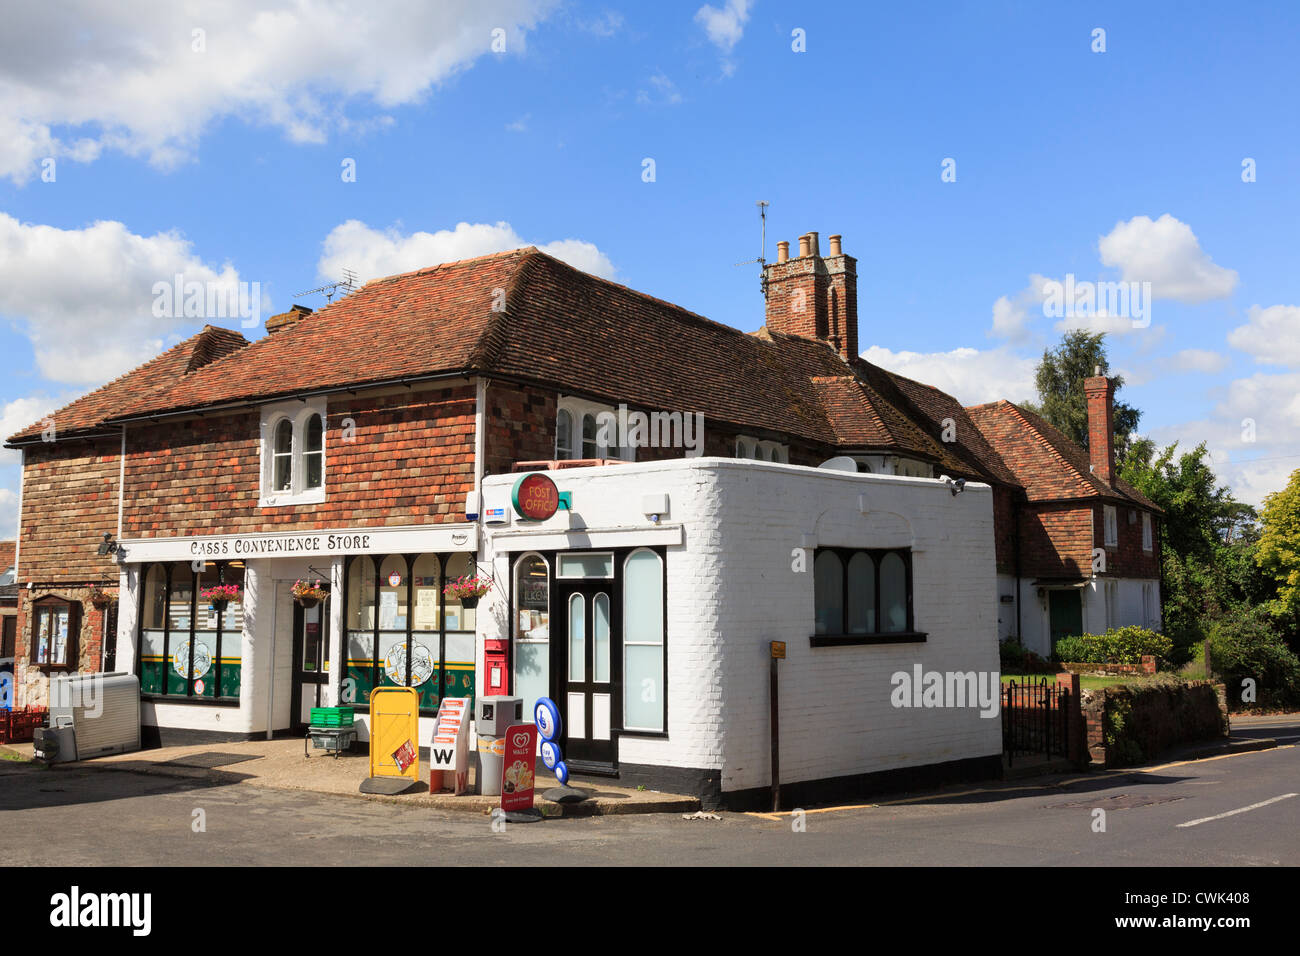 Post Office shop and convenience store in historic Kentish village of Pluckley, Ashford, Kent, England, UK, Britain Stock Photo